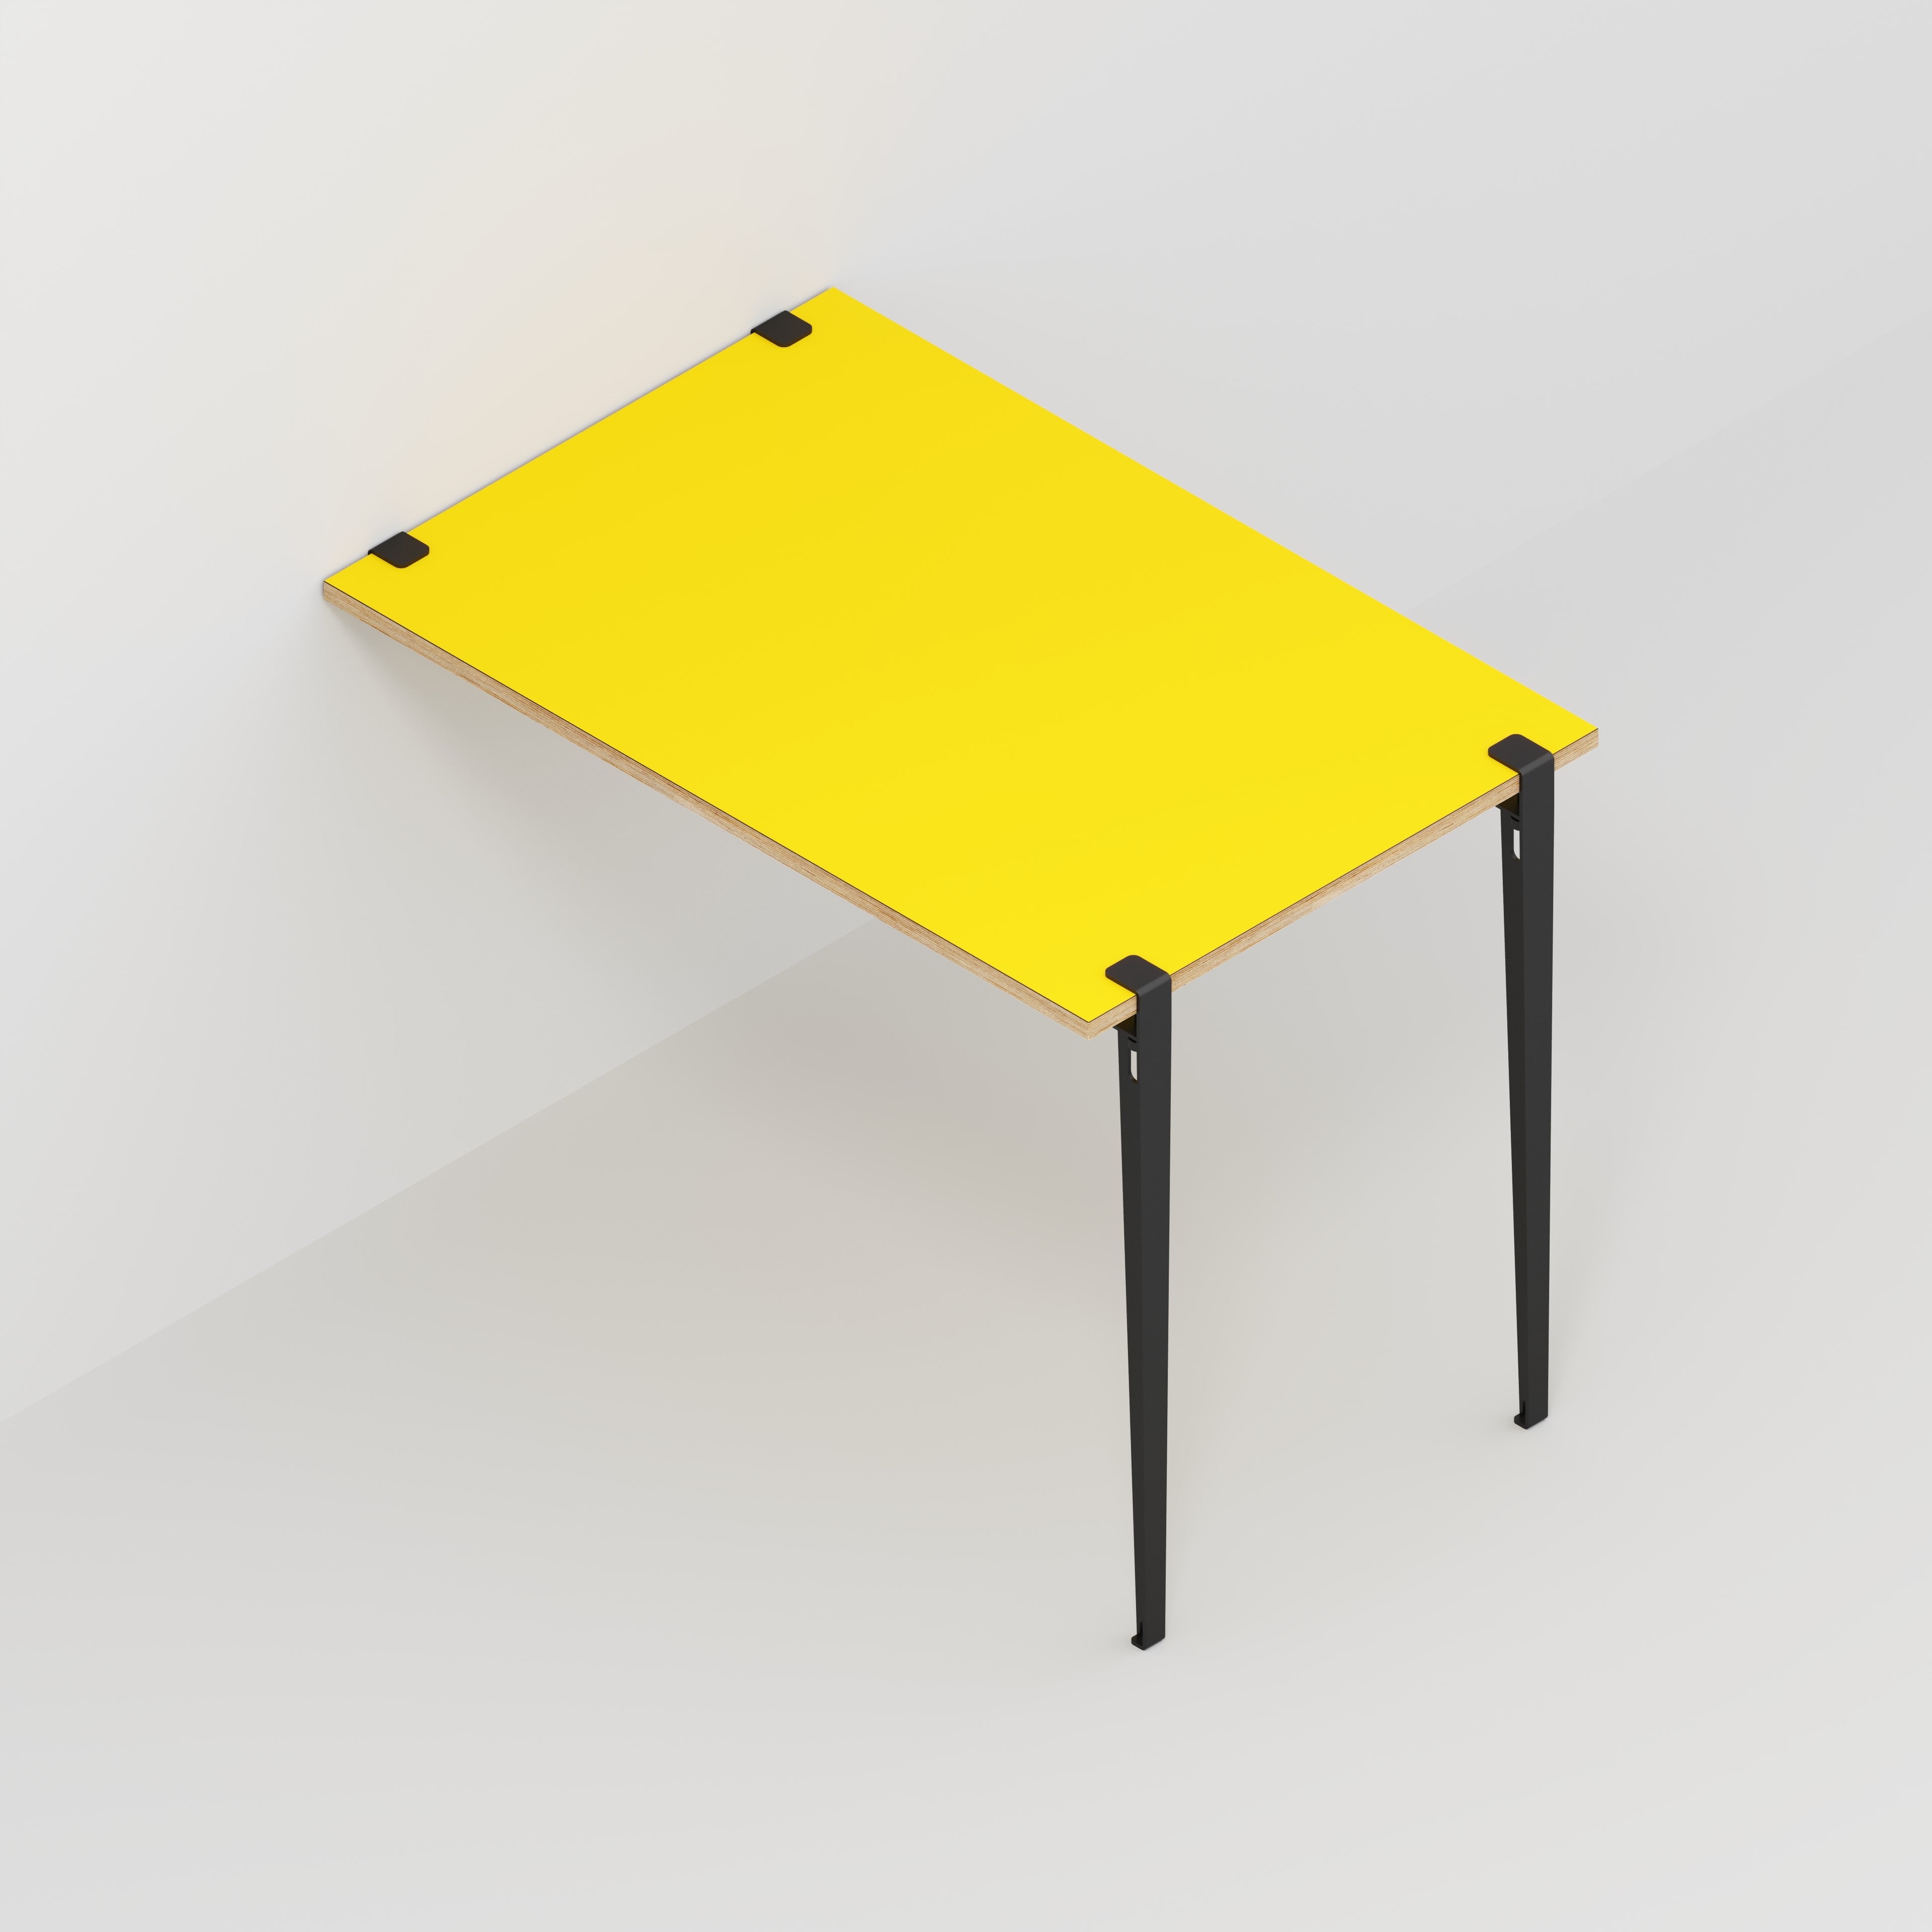 Wall Table with Black Tiptoe Legs and Brackets - Formica Chrome Yellow - 1200(w) x 800(d) x 900(h)